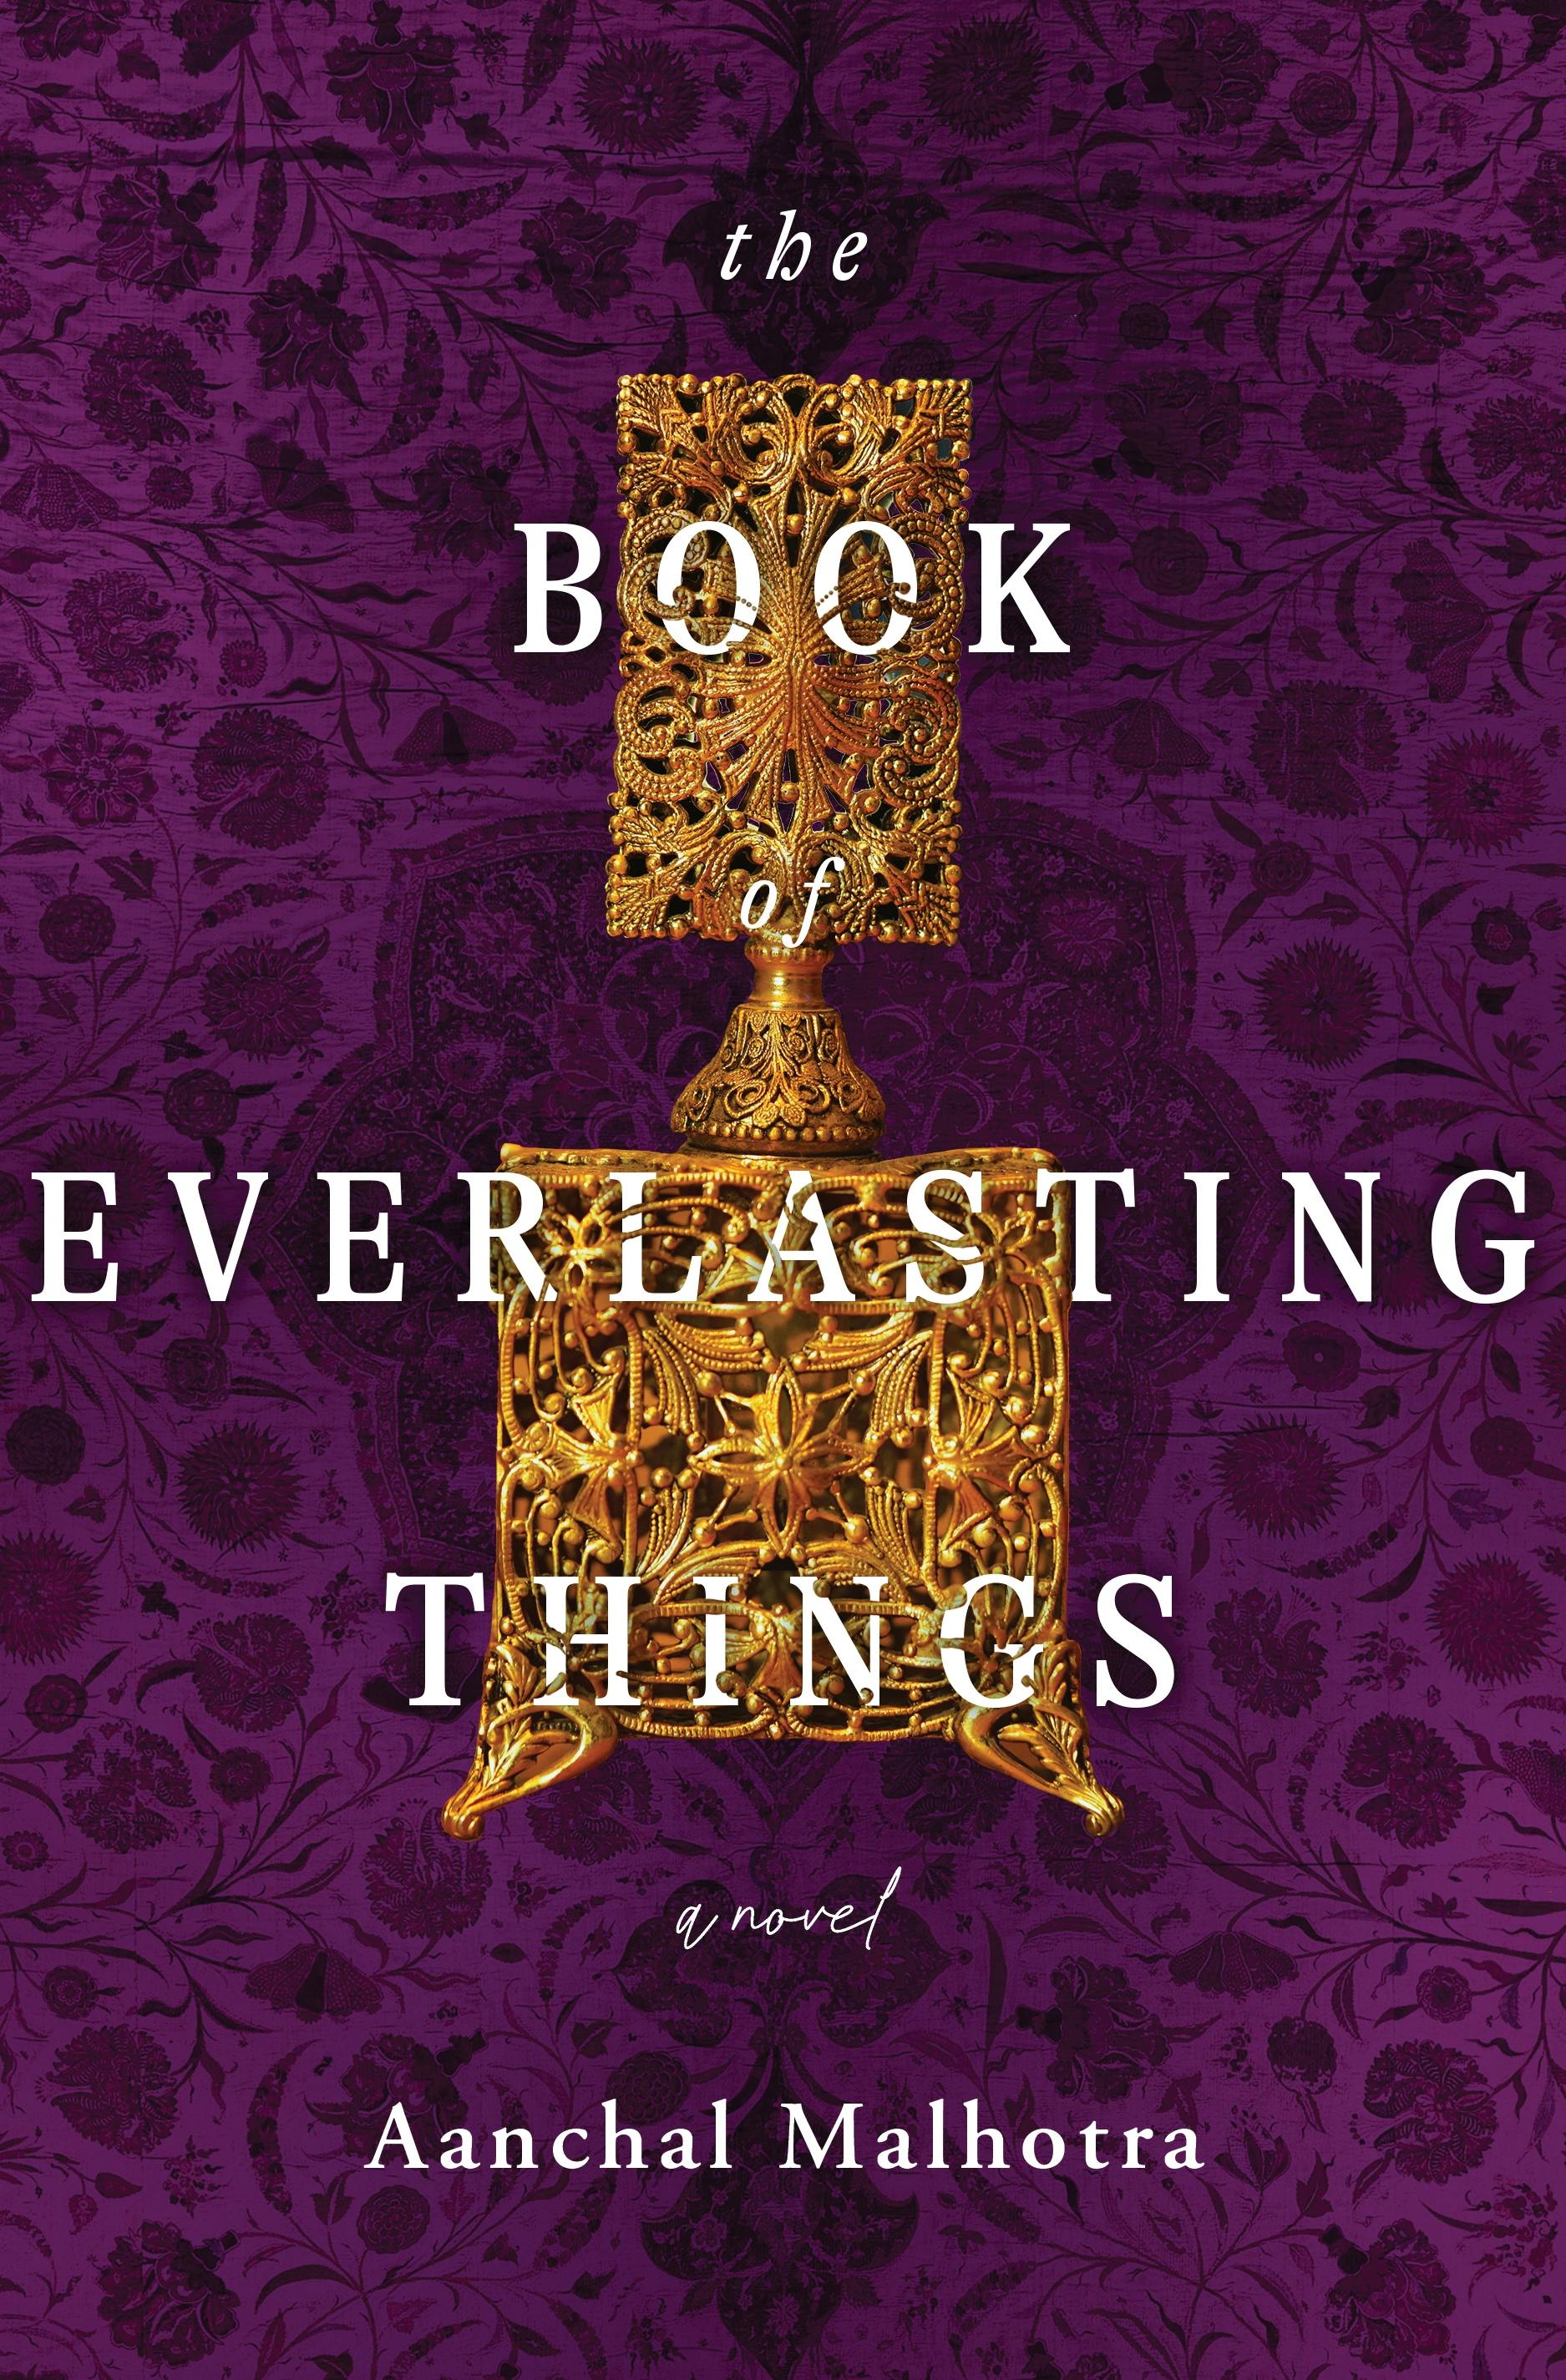 The book cover for The Book of Everlasting Things by Aanchal Malhotra